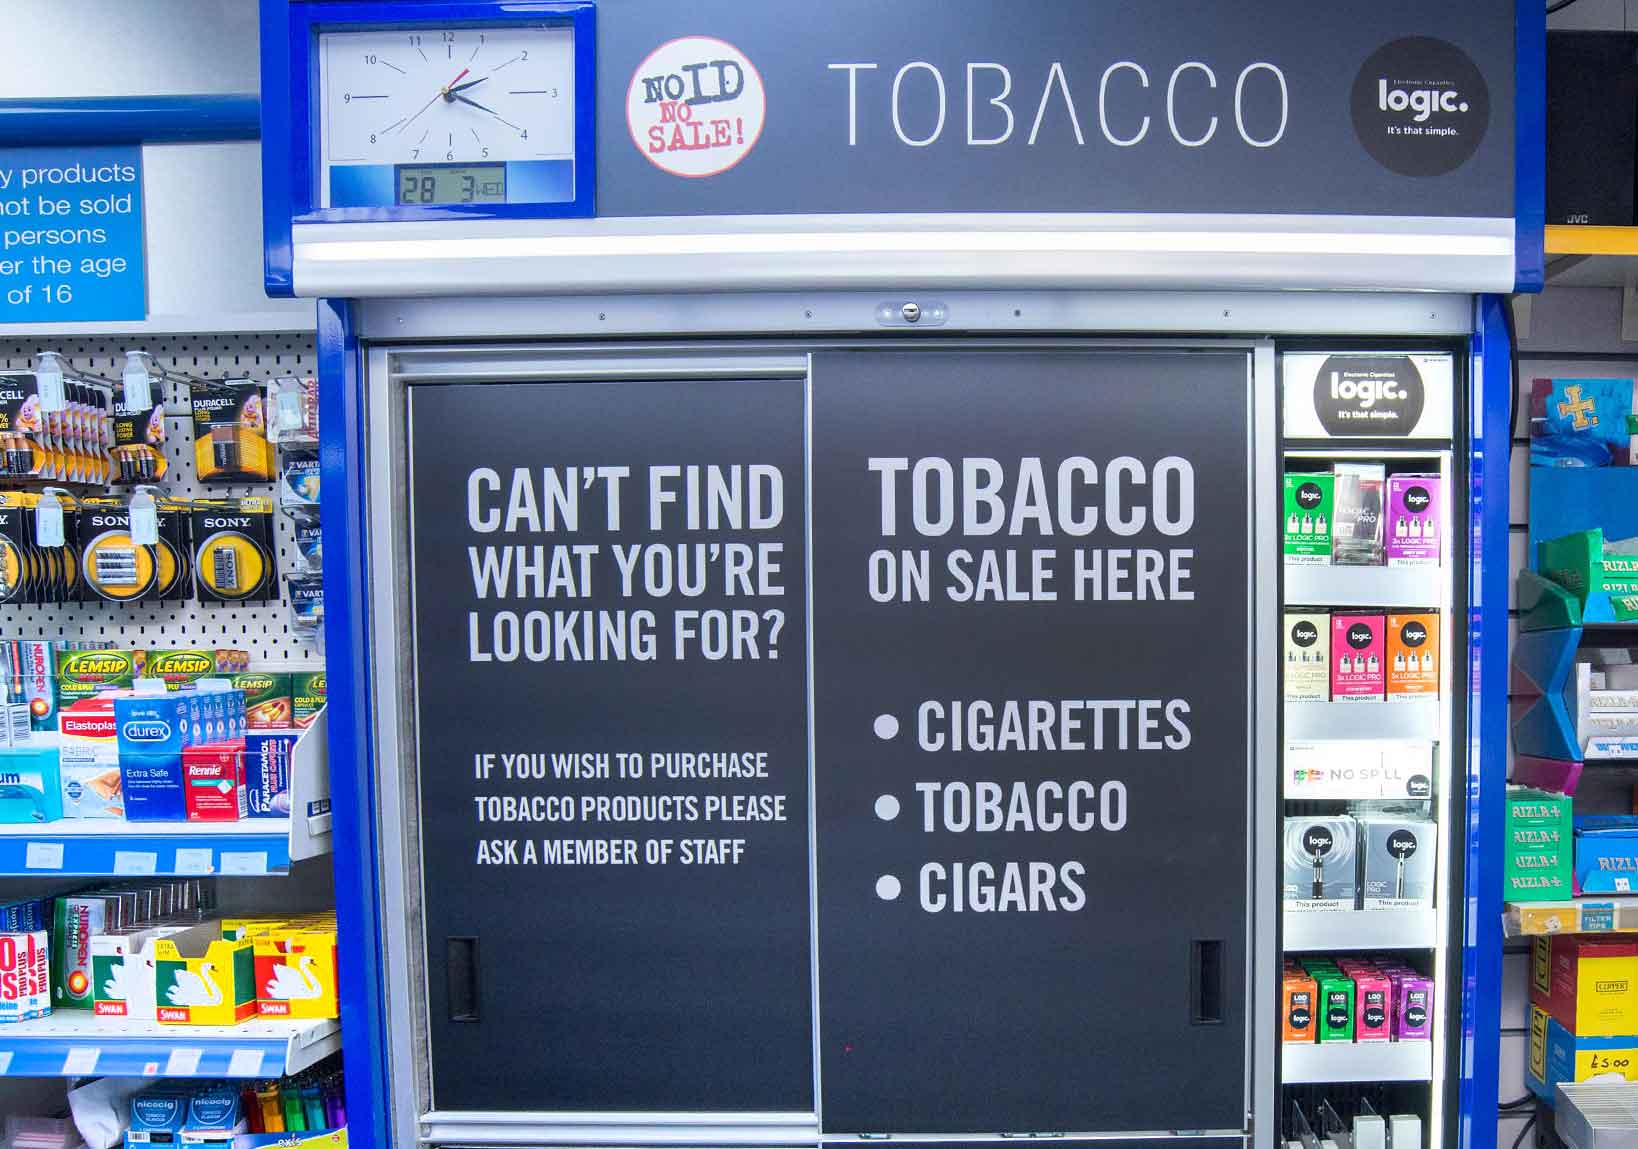 Retailers have called on tobacco manufacturers to follow British American Tobacco in planning to swap out stock after next year’s menthol ban